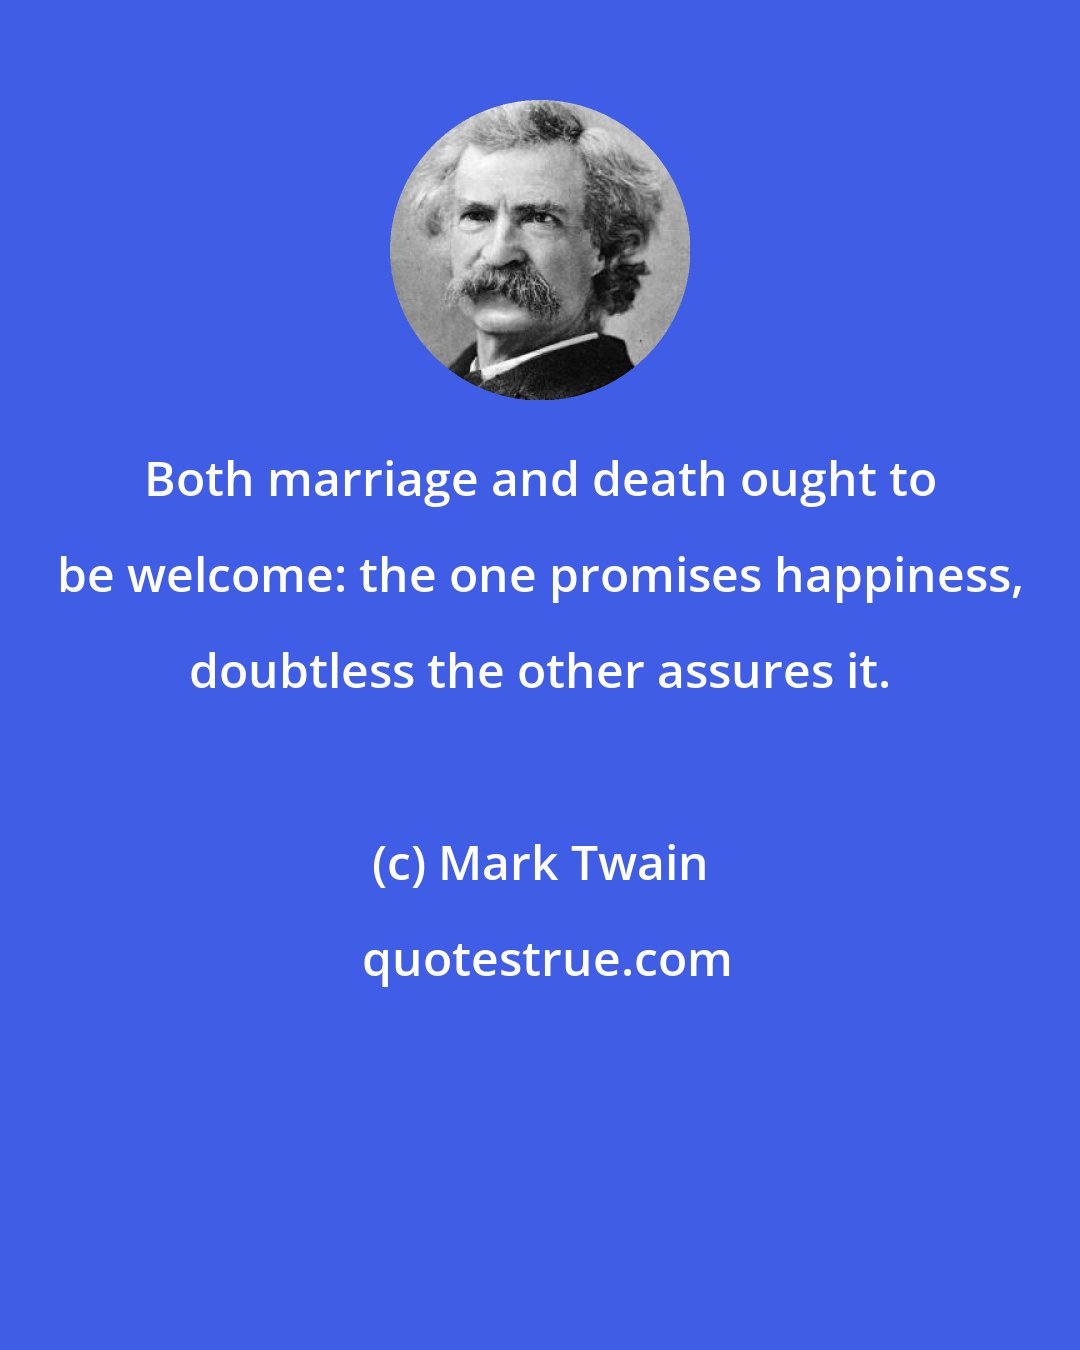 Mark Twain: Both marriage and death ought to be welcome: the one promises happiness, doubtless the other assures it.